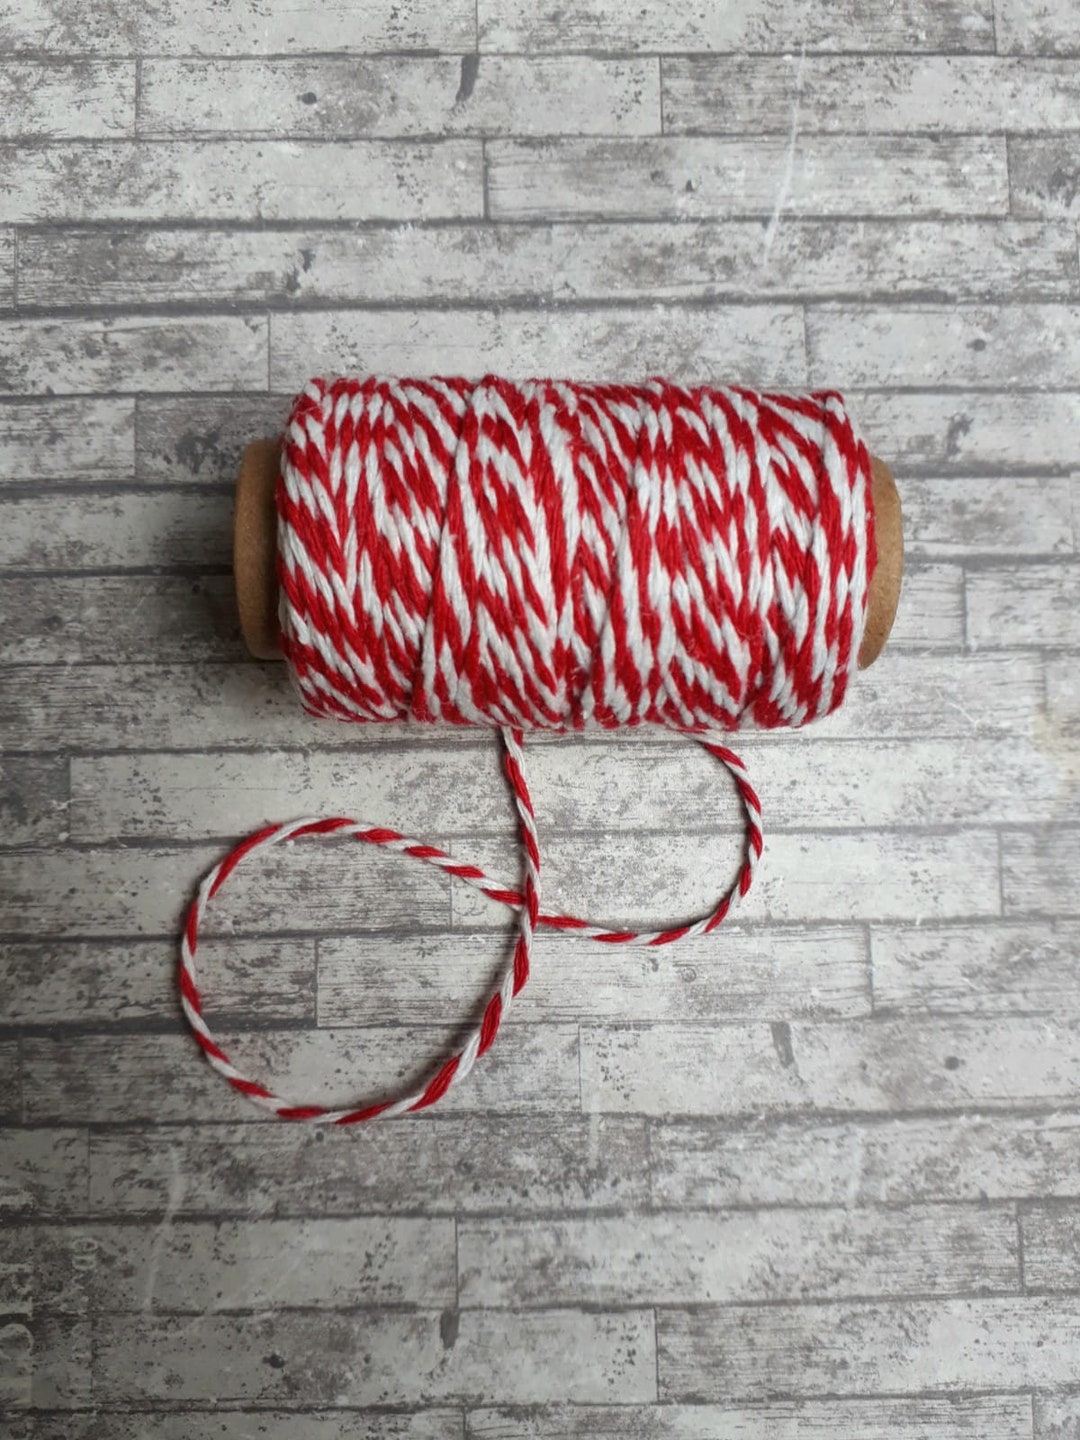 Abstract White Background Tied Up With Red Rope Bakers Twine Bow